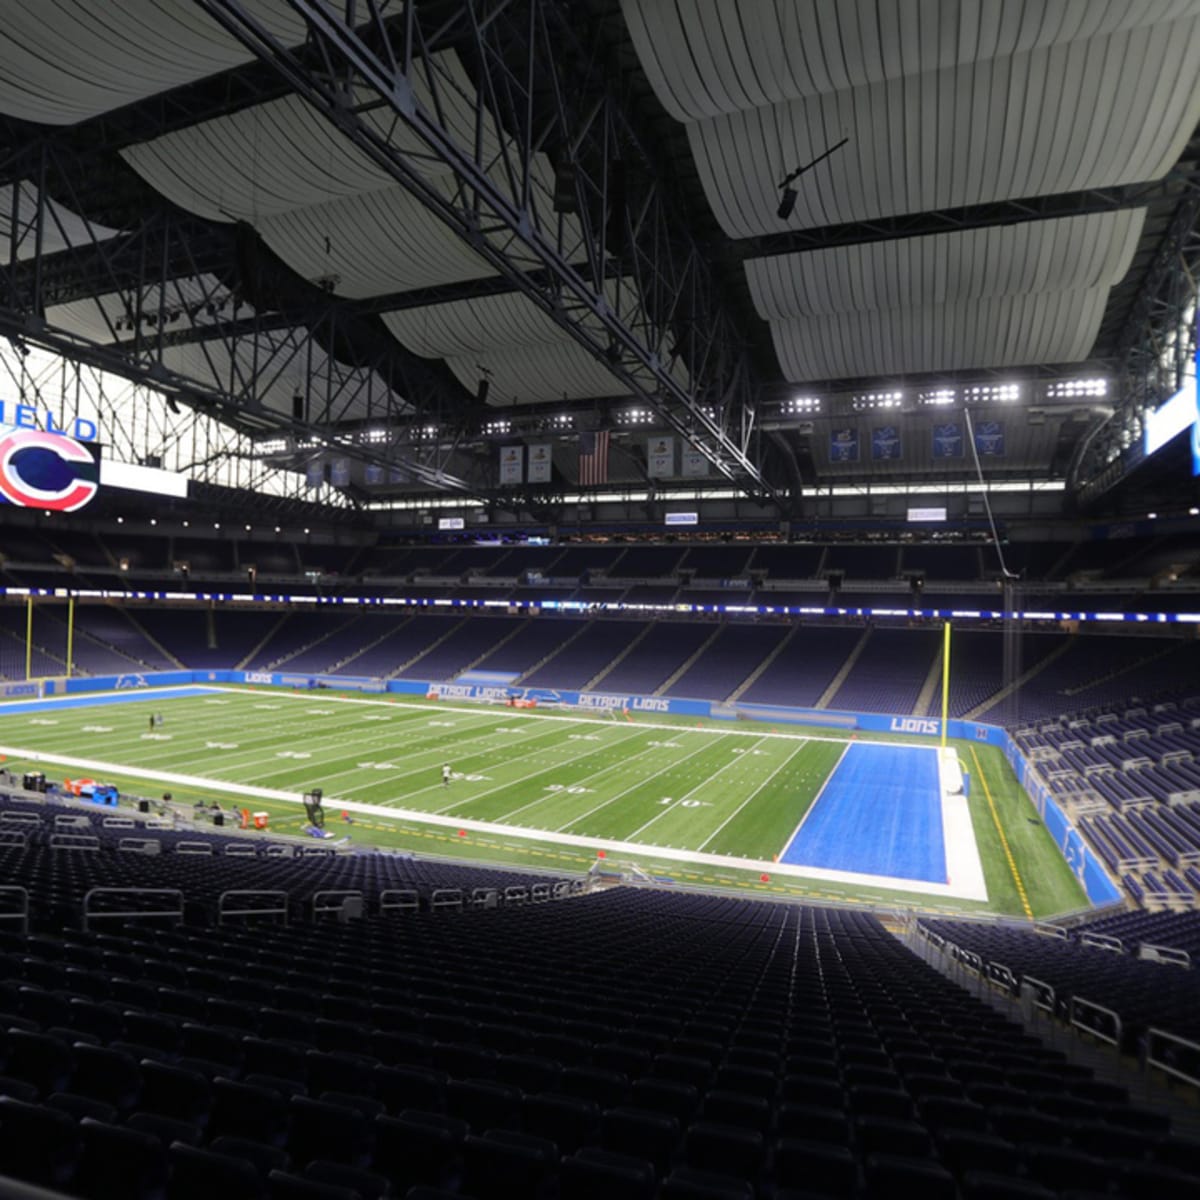 Detroit Lions replacing turf at Ford Field earlier - Sports